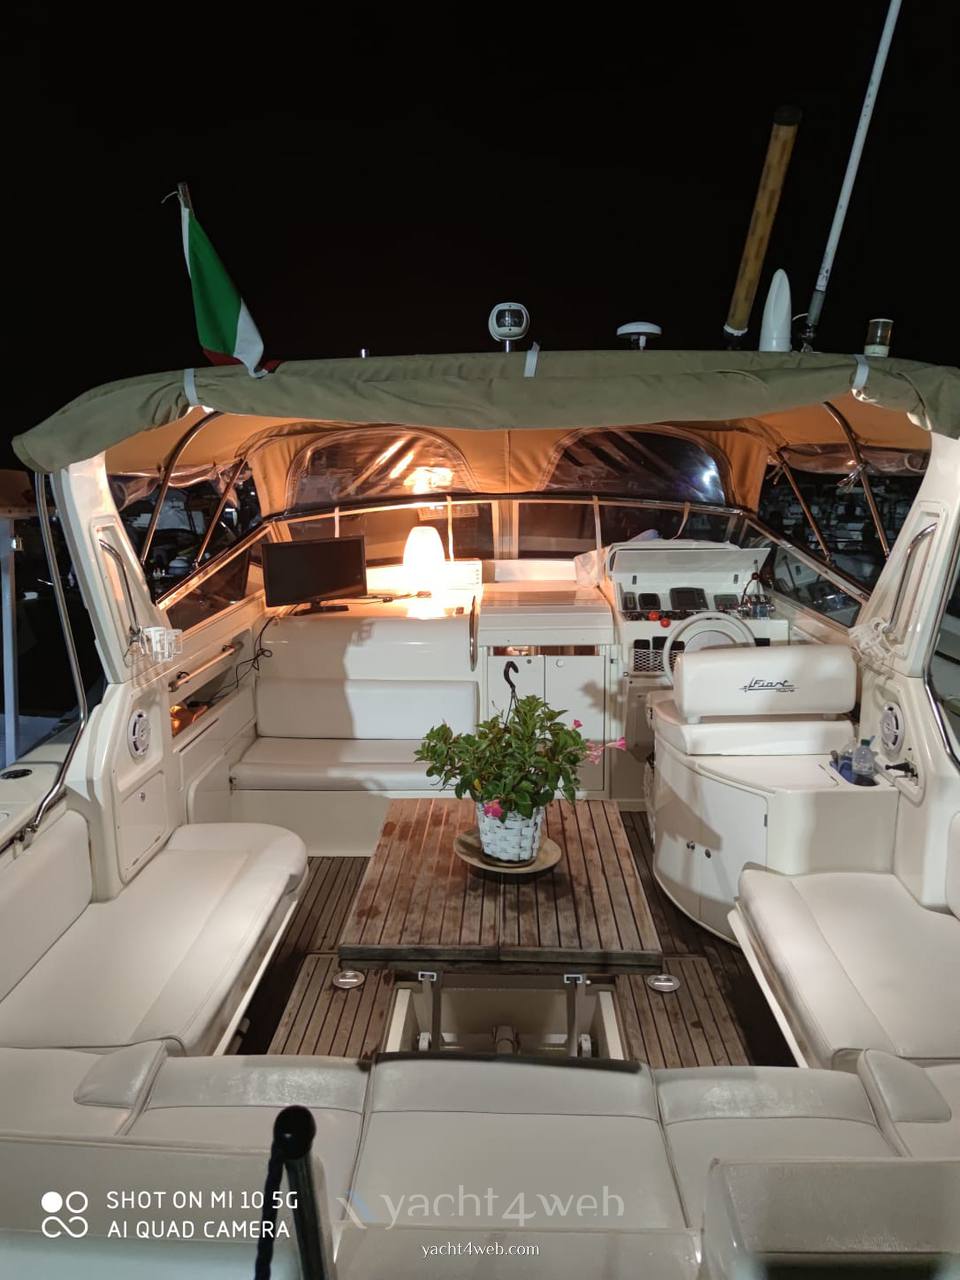 FIart 35 genius Motor boat used for sale